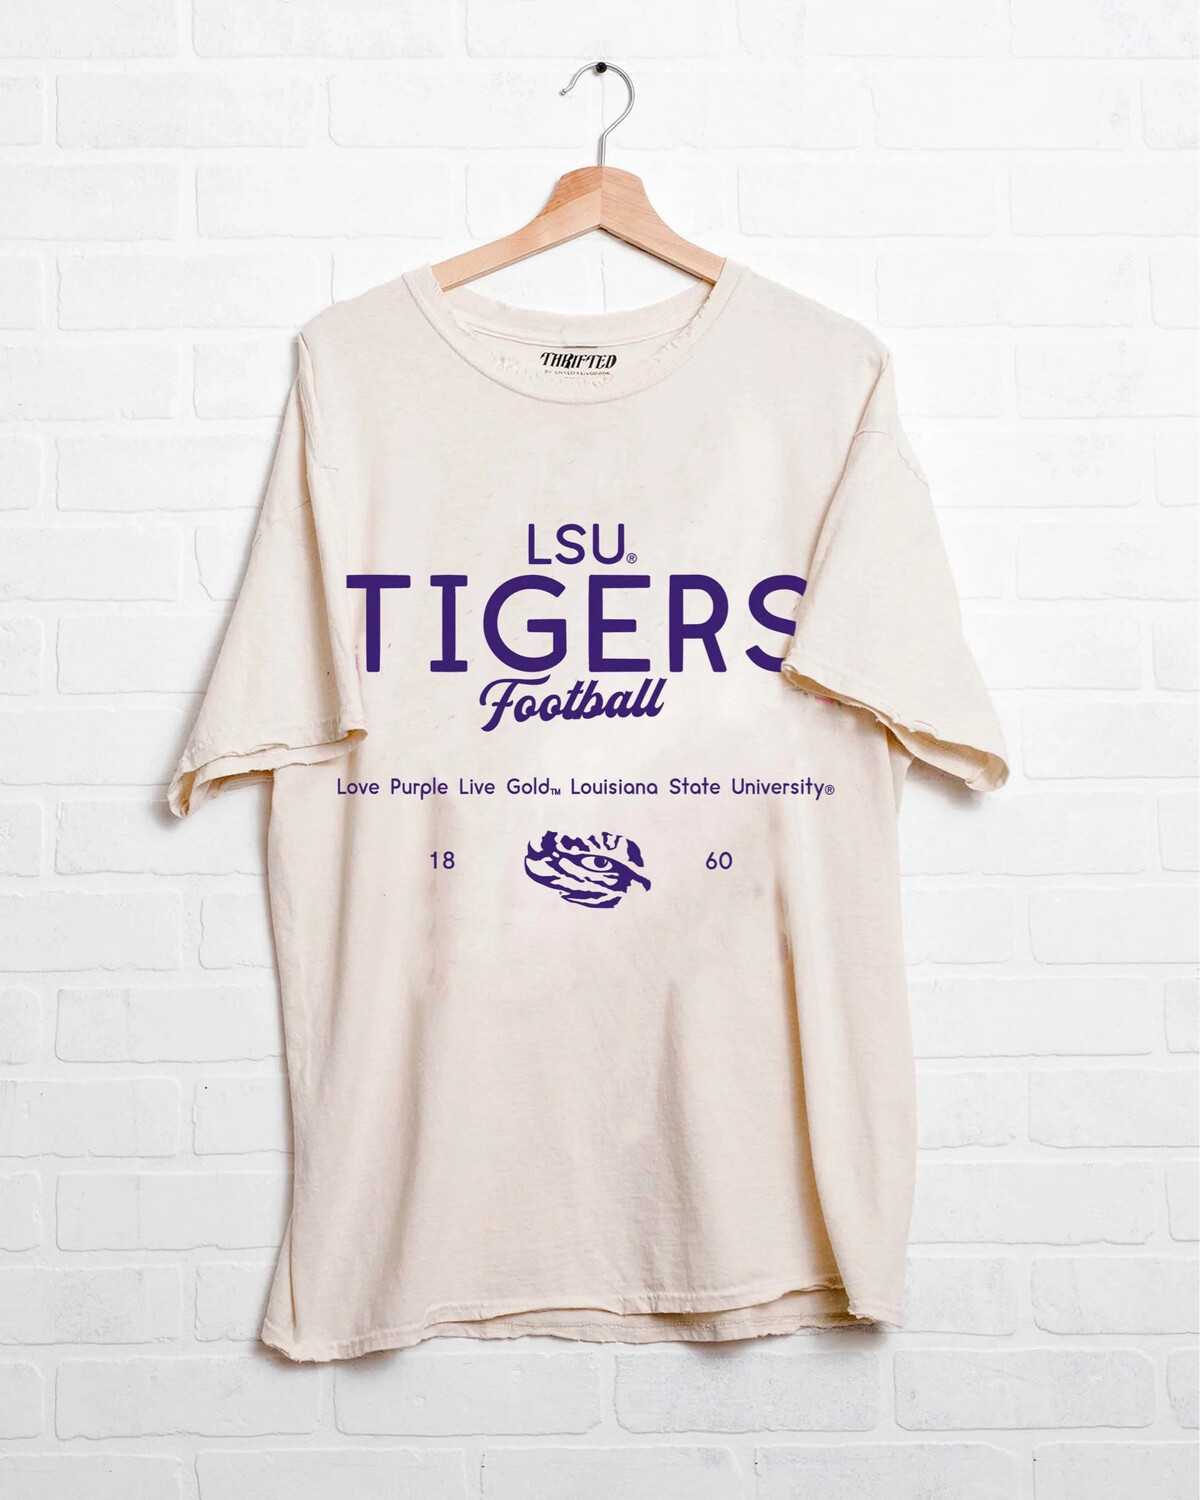 LSU Tigers Shot Off Thrifted Tee